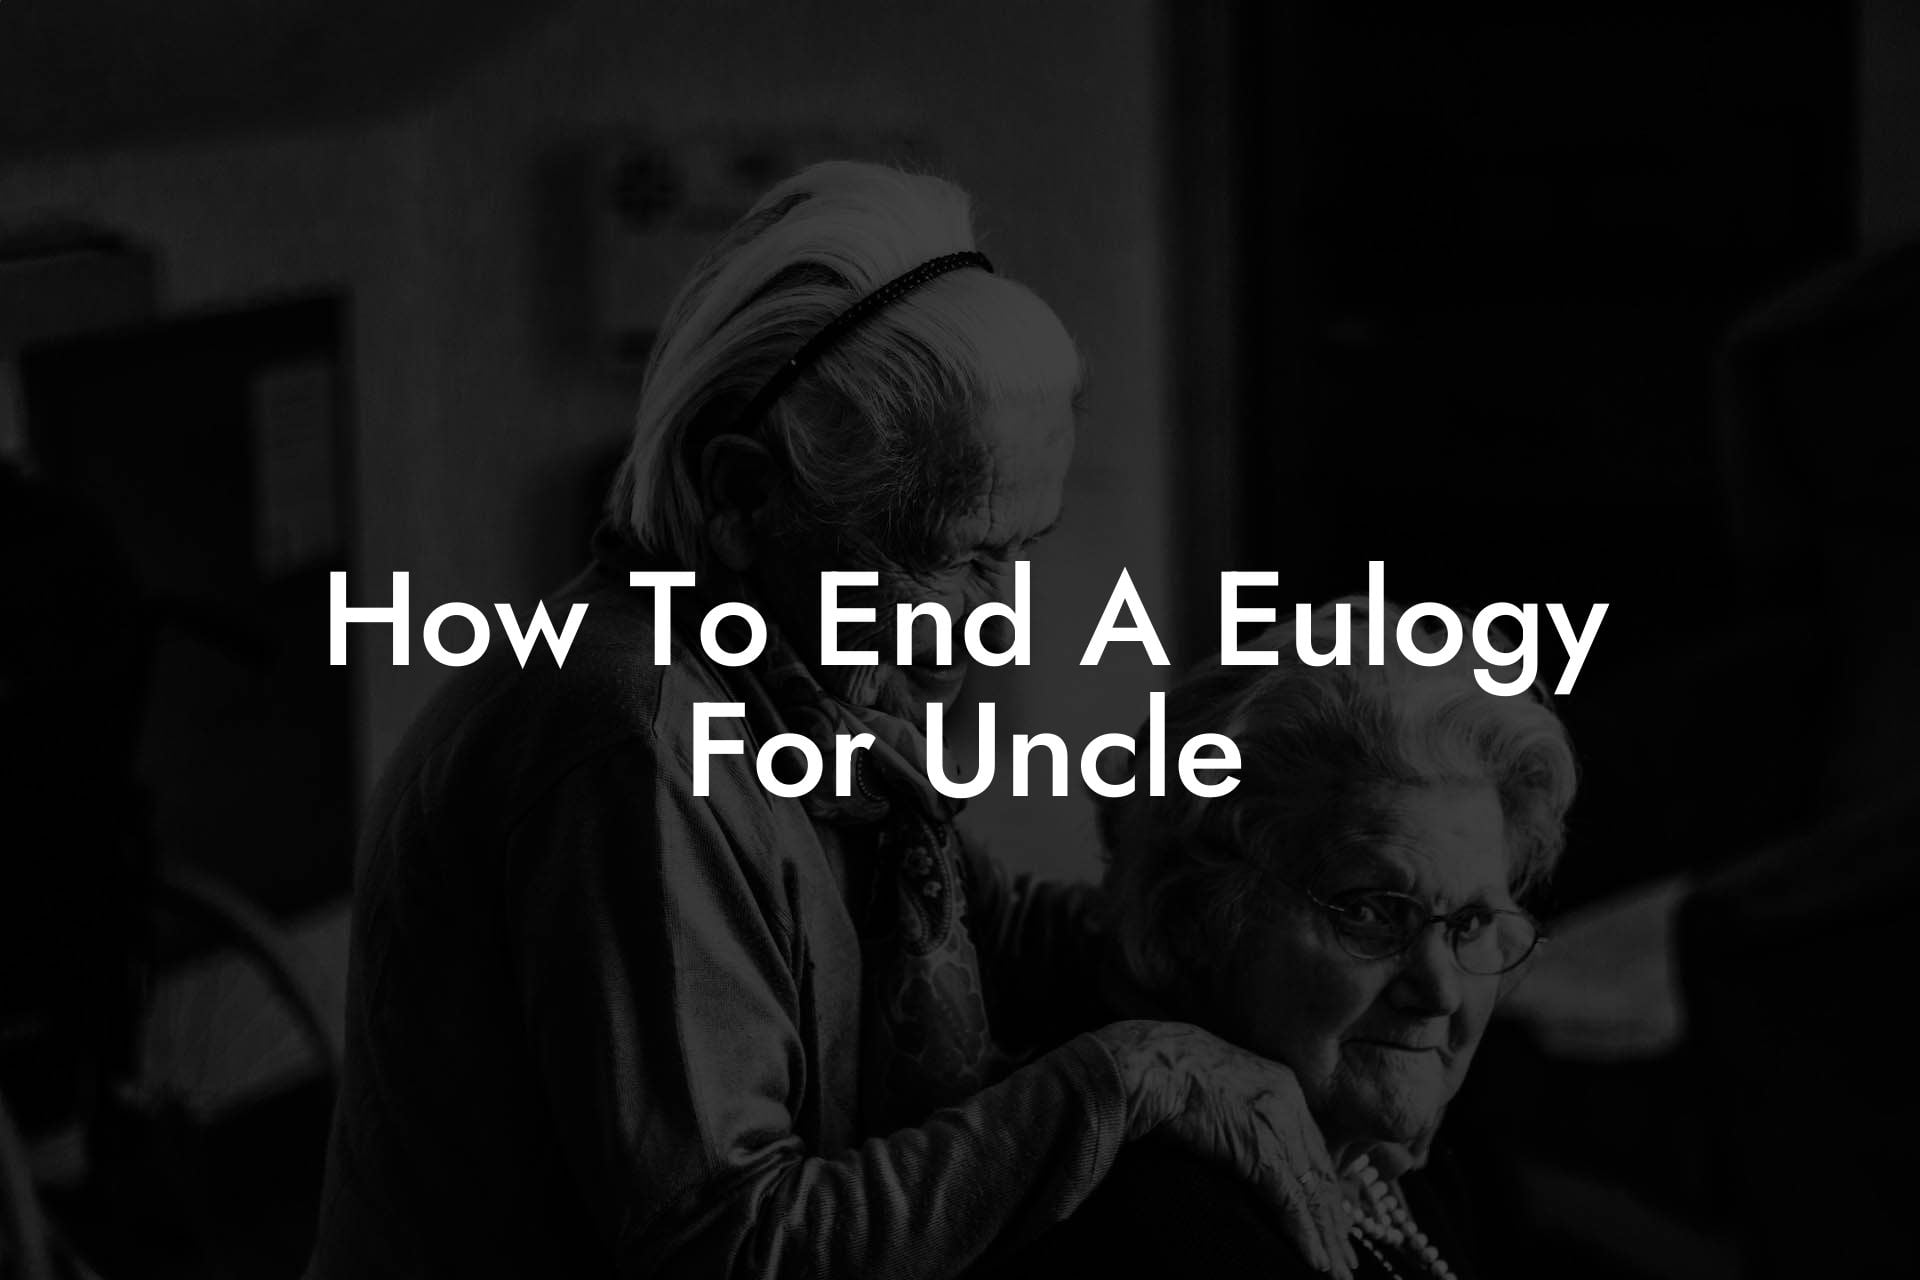 How To End A Eulogy For Uncle